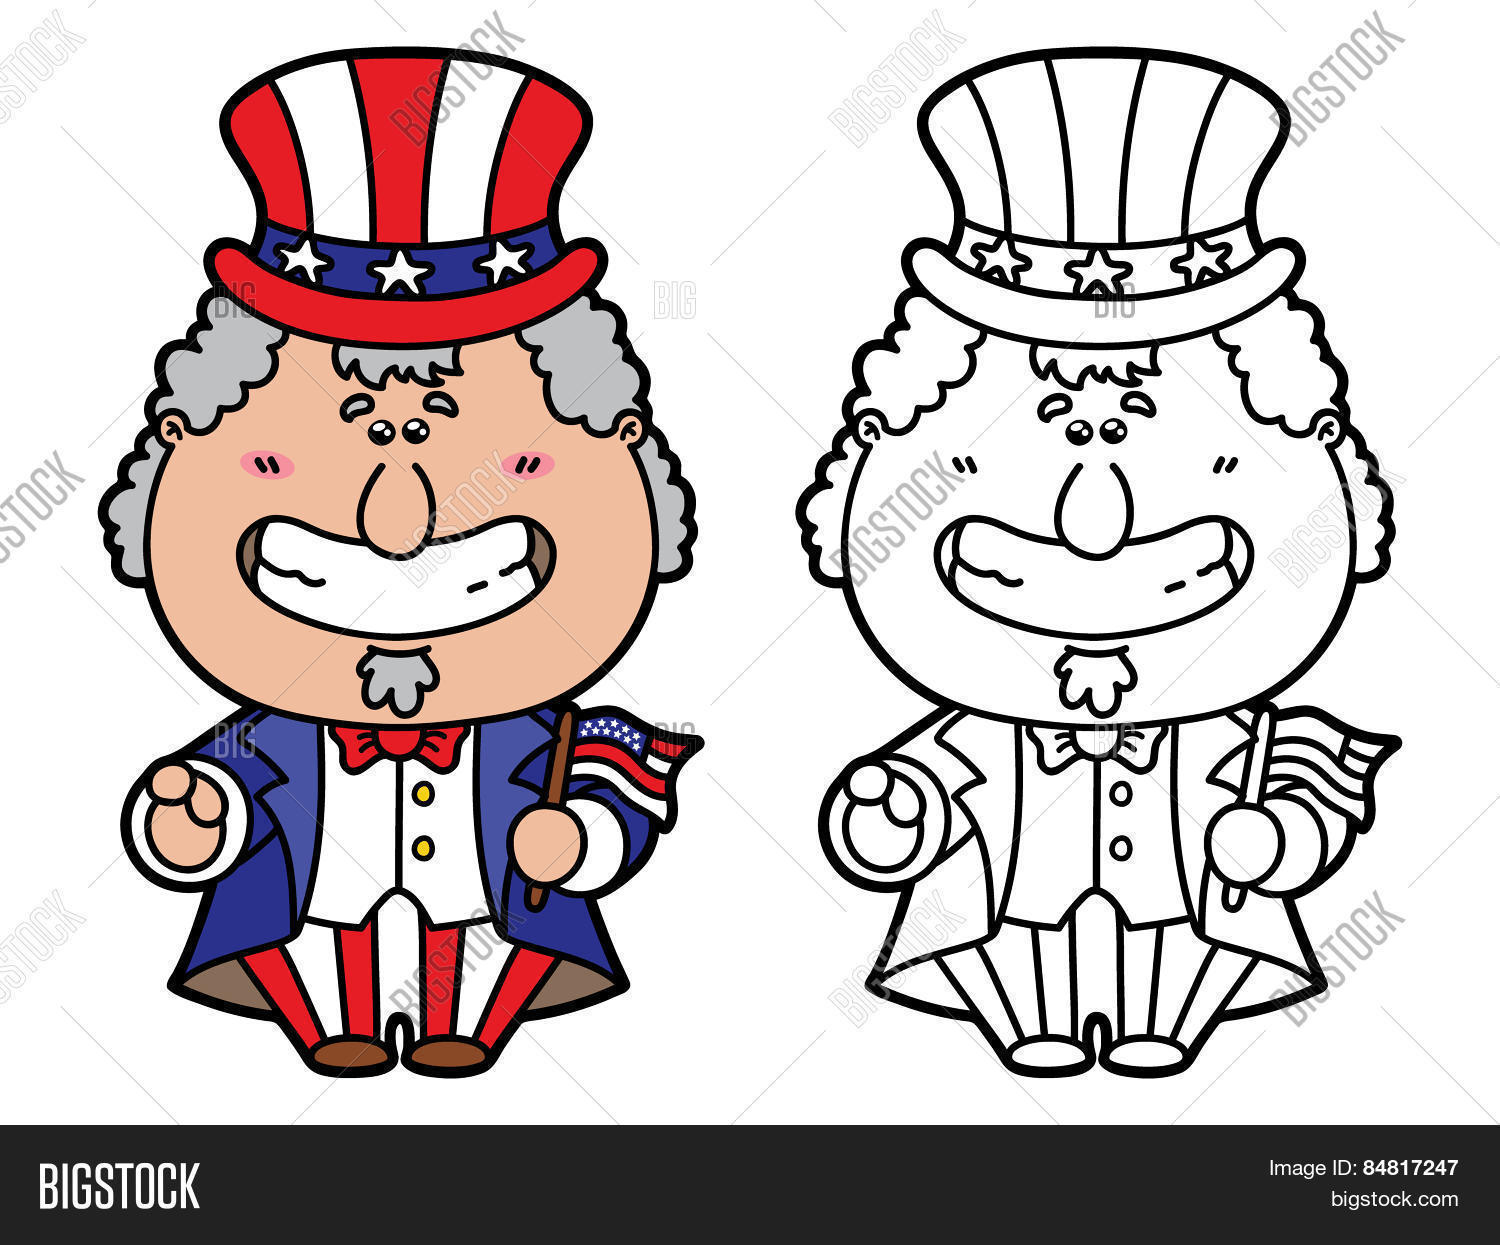 Uncle sam coloring vector photo free trial bigstock